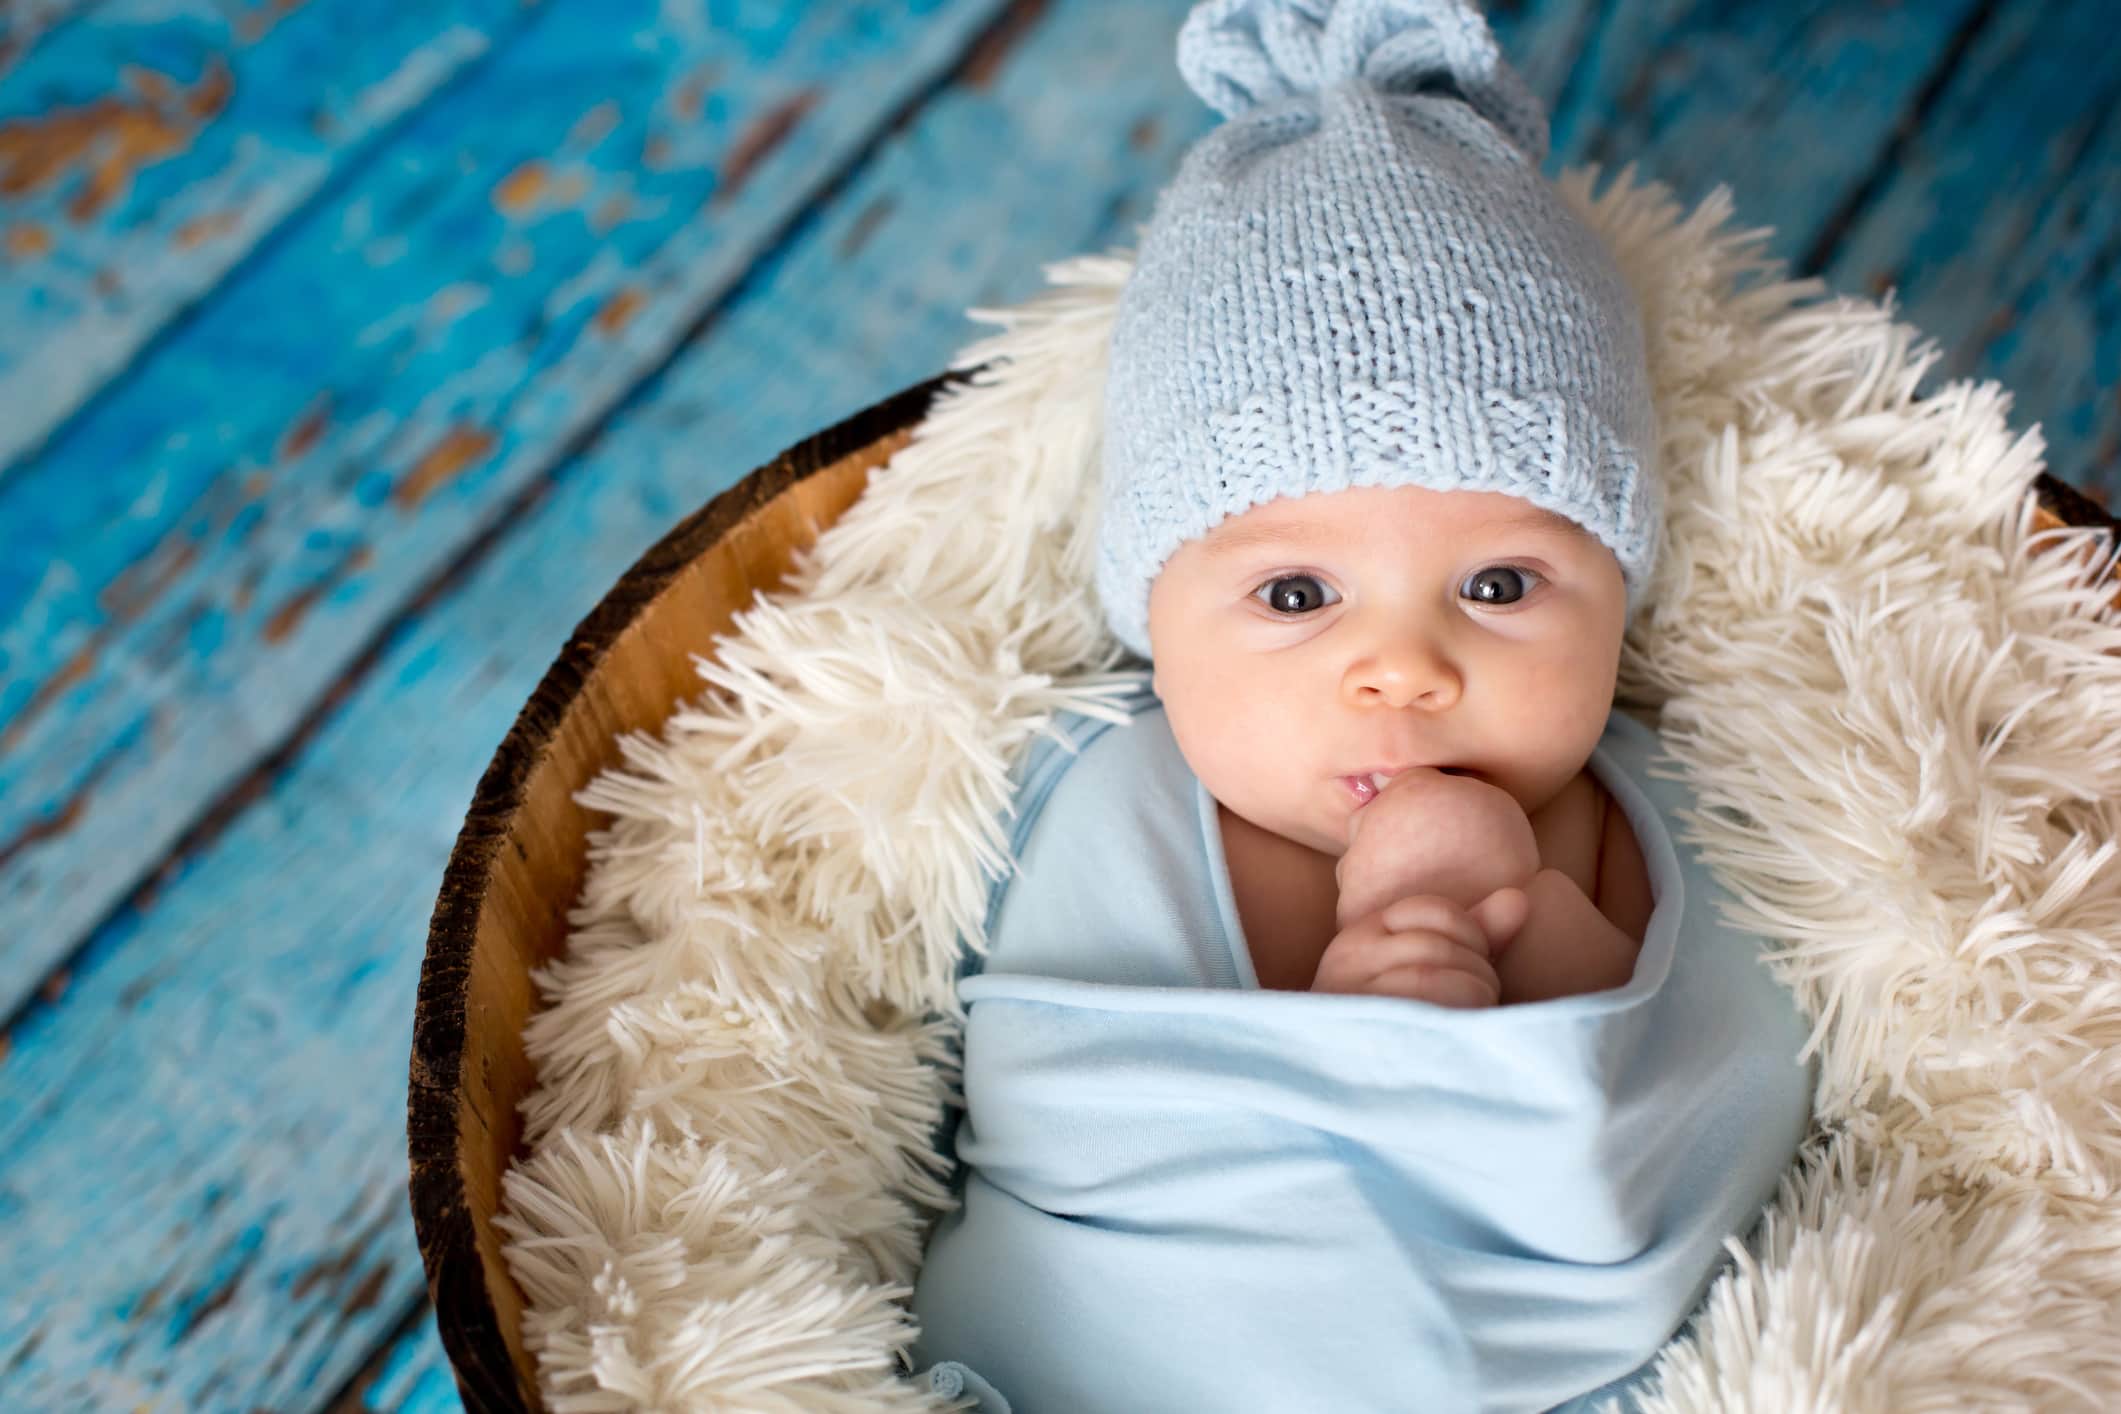 100 Baby Boy Names That Start With C - Baby Chick